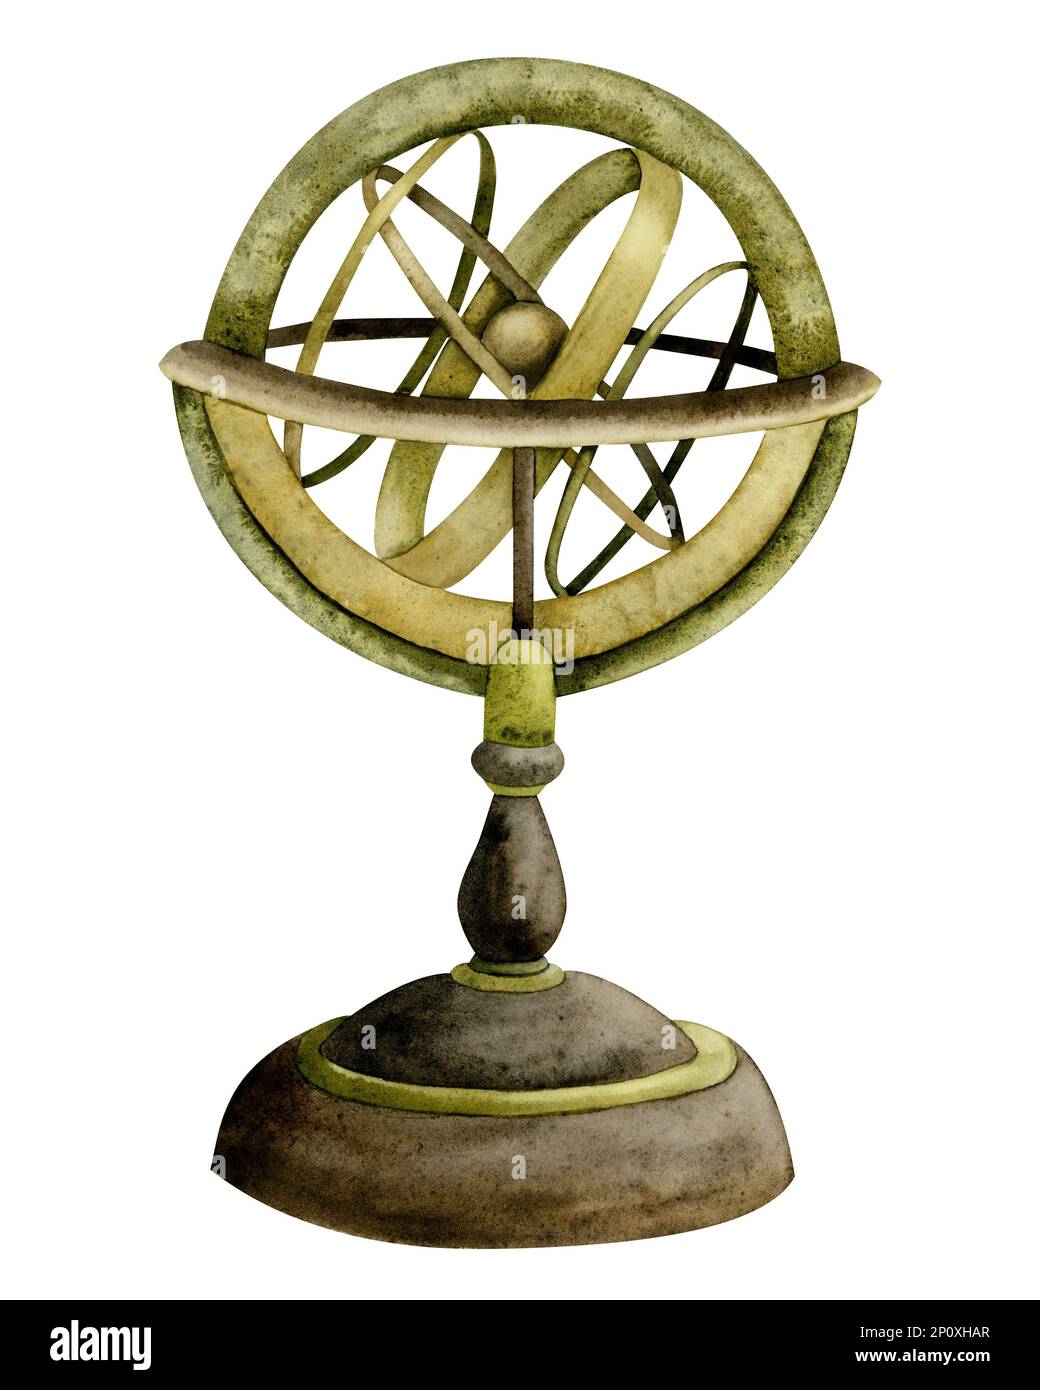 Watercolor navigation armillary sphere, vintage spherical astrolabe instrument illustration isolated on white. Stock Photo